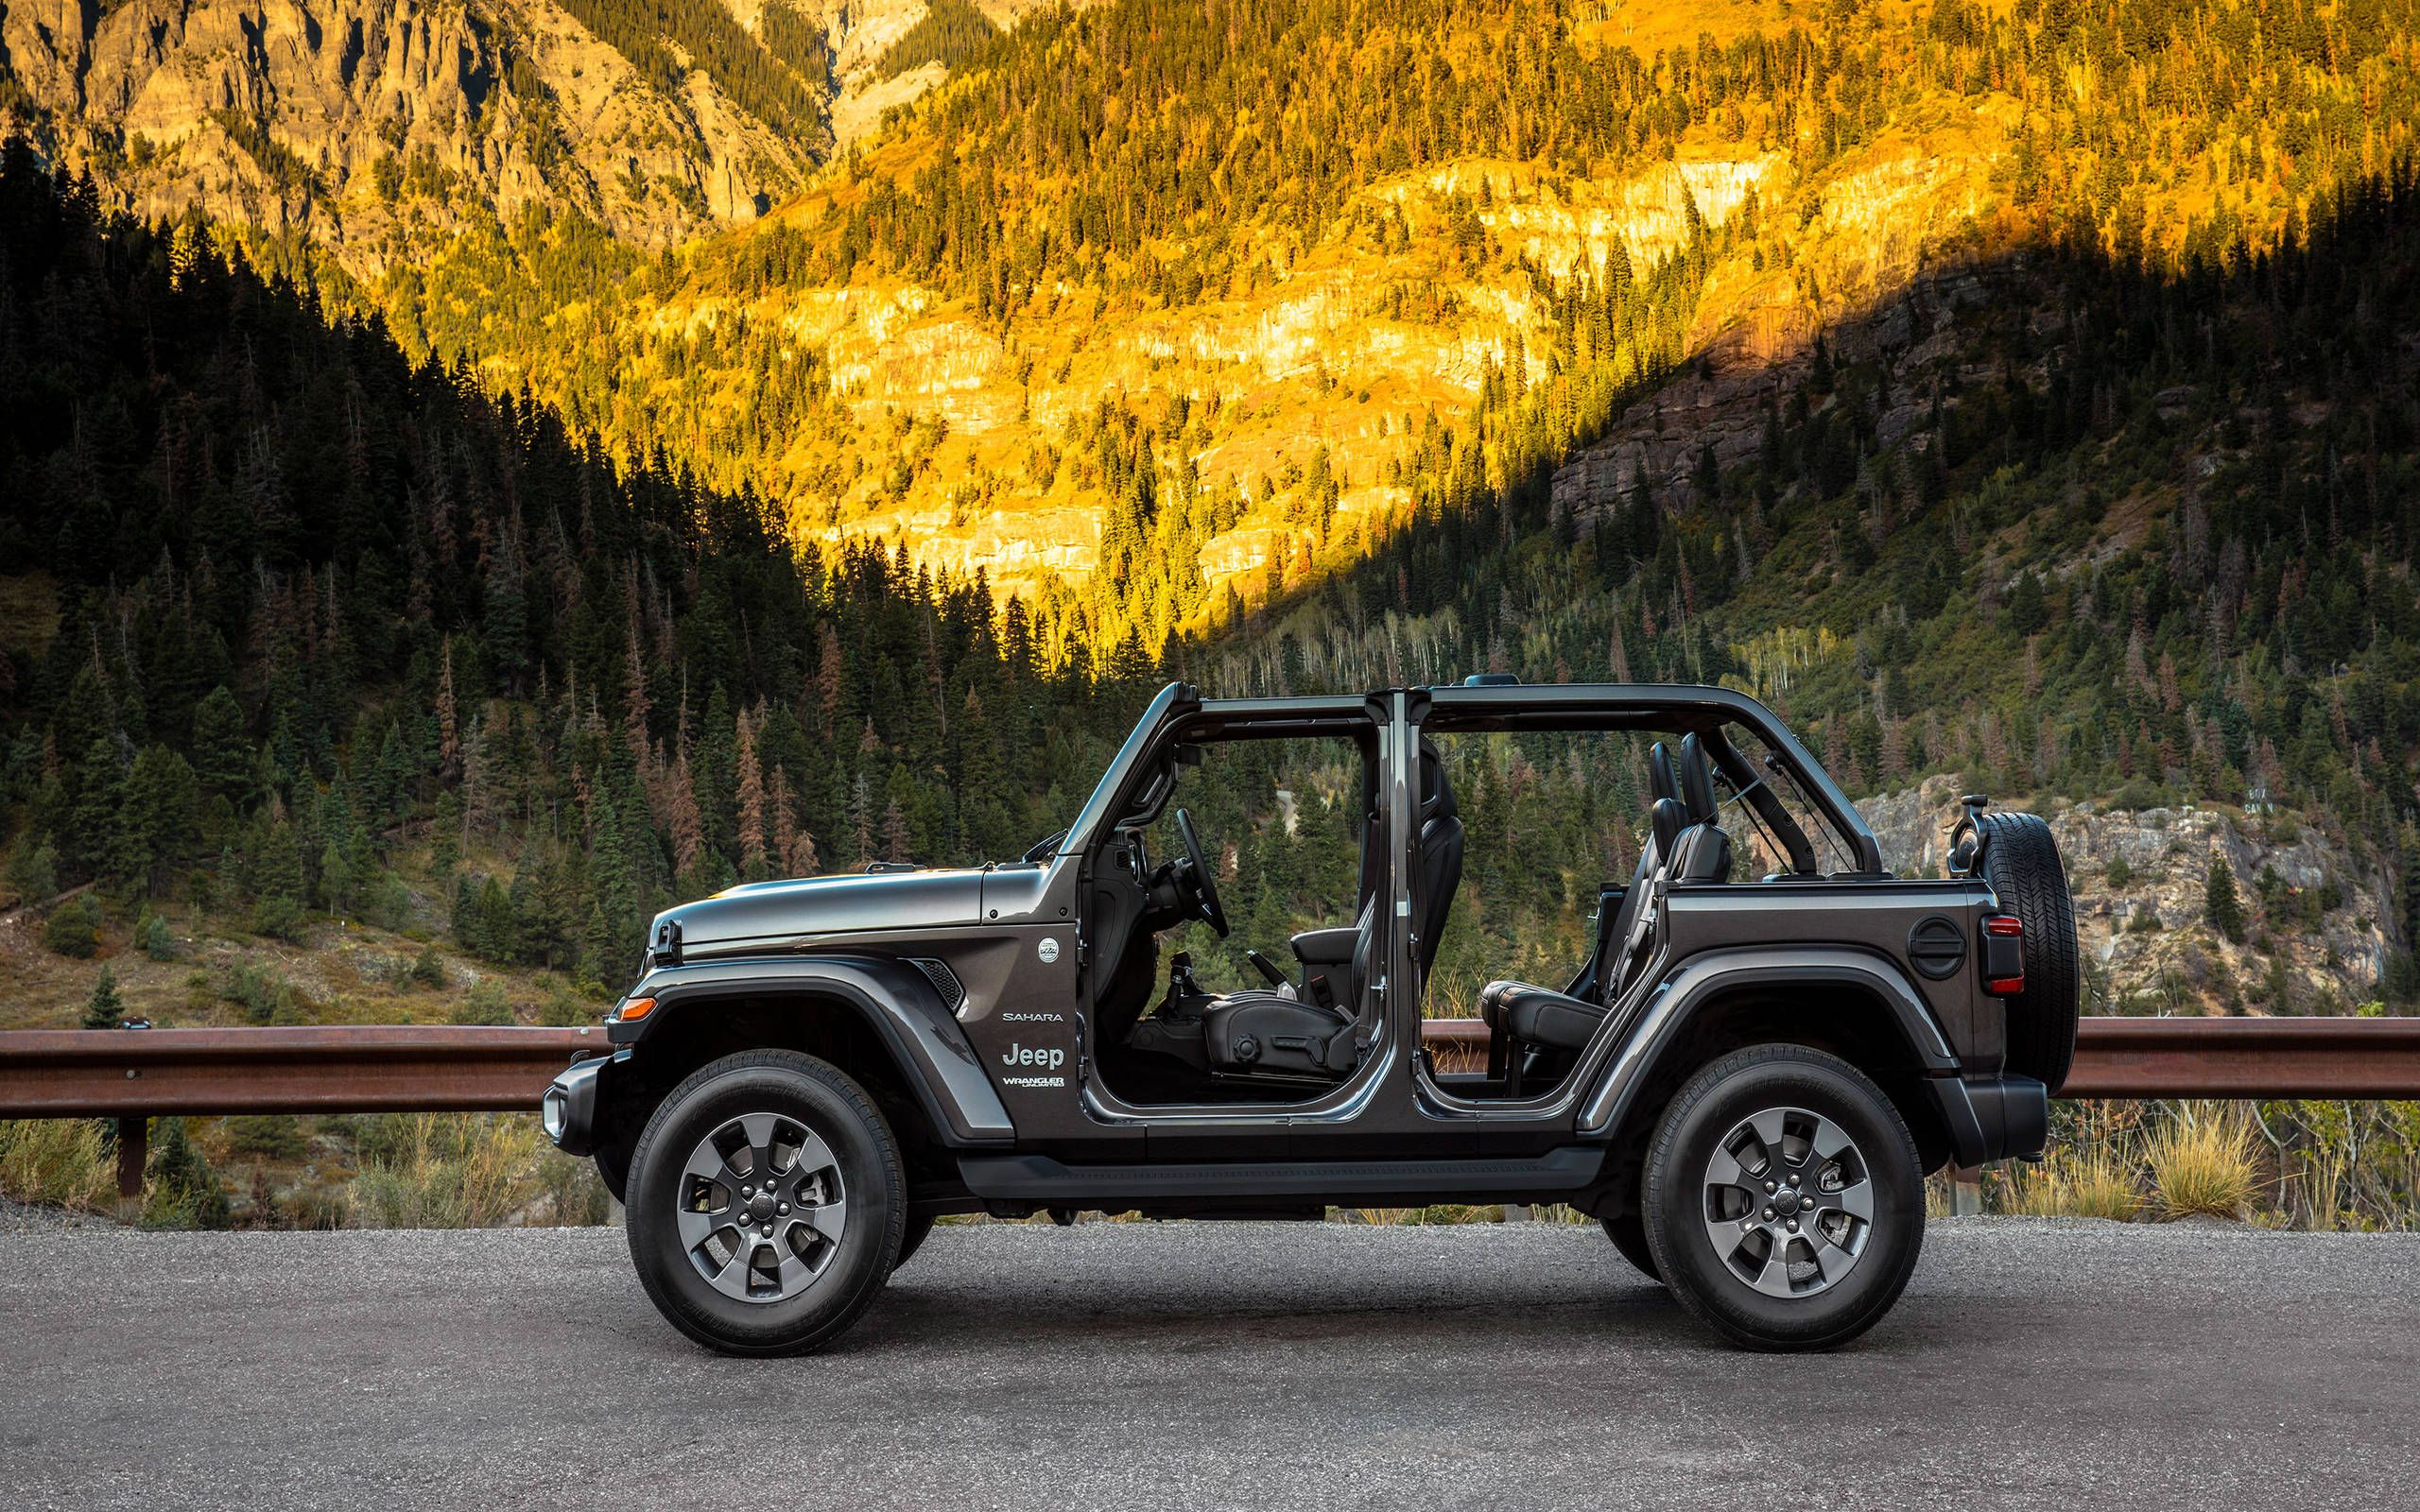 2018 Jeep Wrangler JL revealed: Get all the details about America's new  favorite off-roader